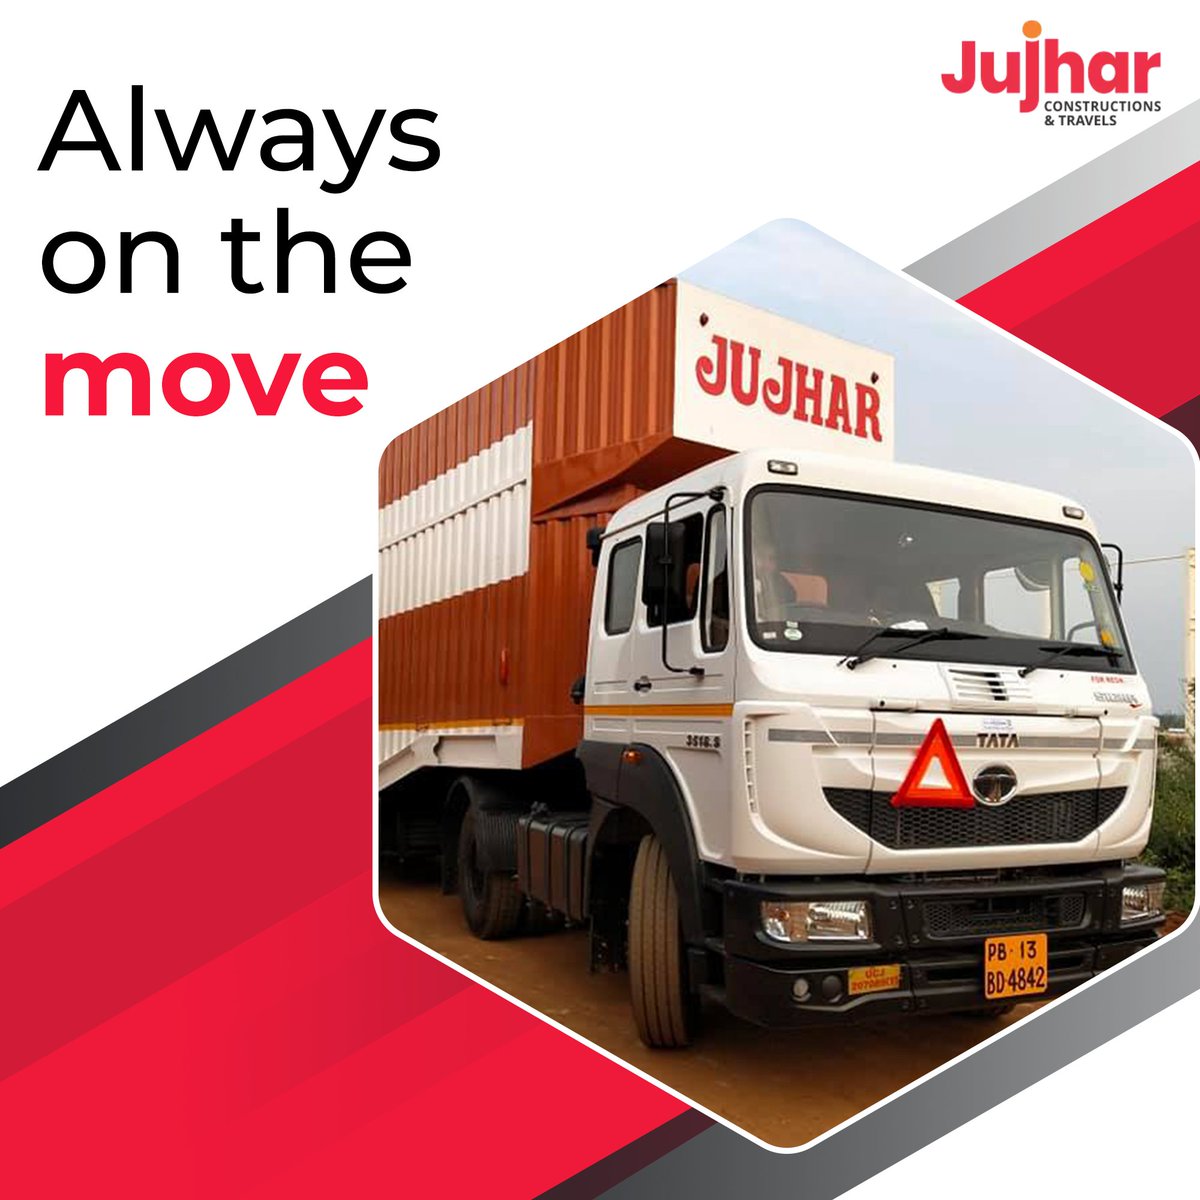 Your Trusted Partner for efficient Supply Chain Solutions.

#JujharLogistics #EfficientSupplyChain #SeamlessSolutions